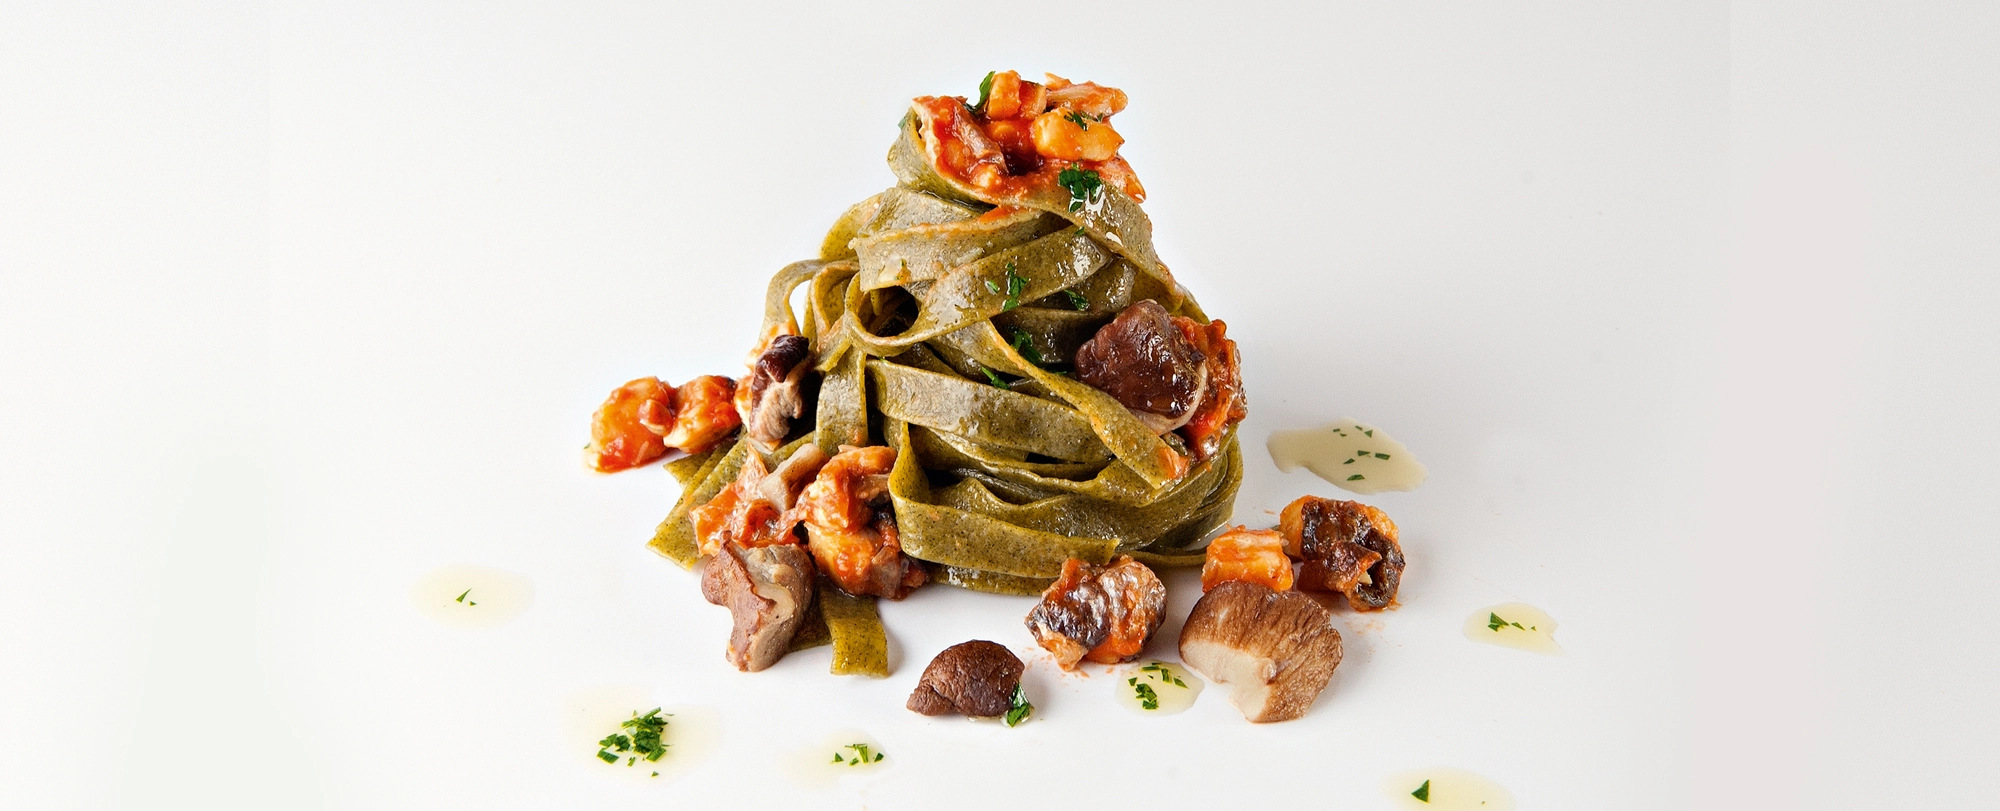 Ortichelle-con-ragout-mushroom-pork-and-herb-olive-oil-